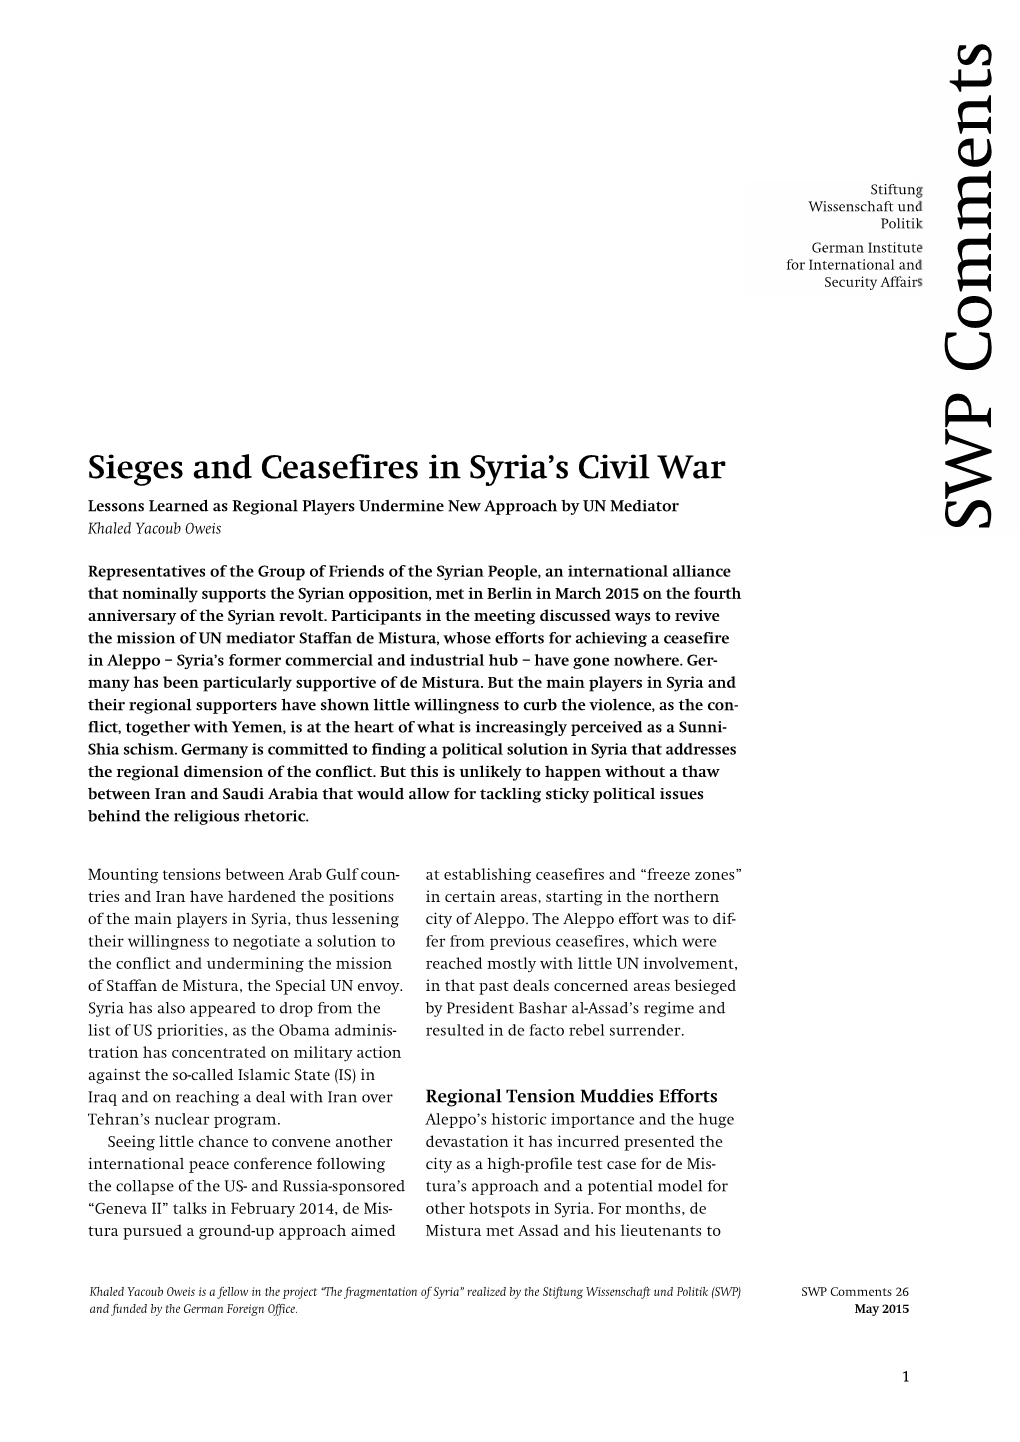 Sieges and Ceasefires in Syria's Civil War. Lessons Learned As Regional